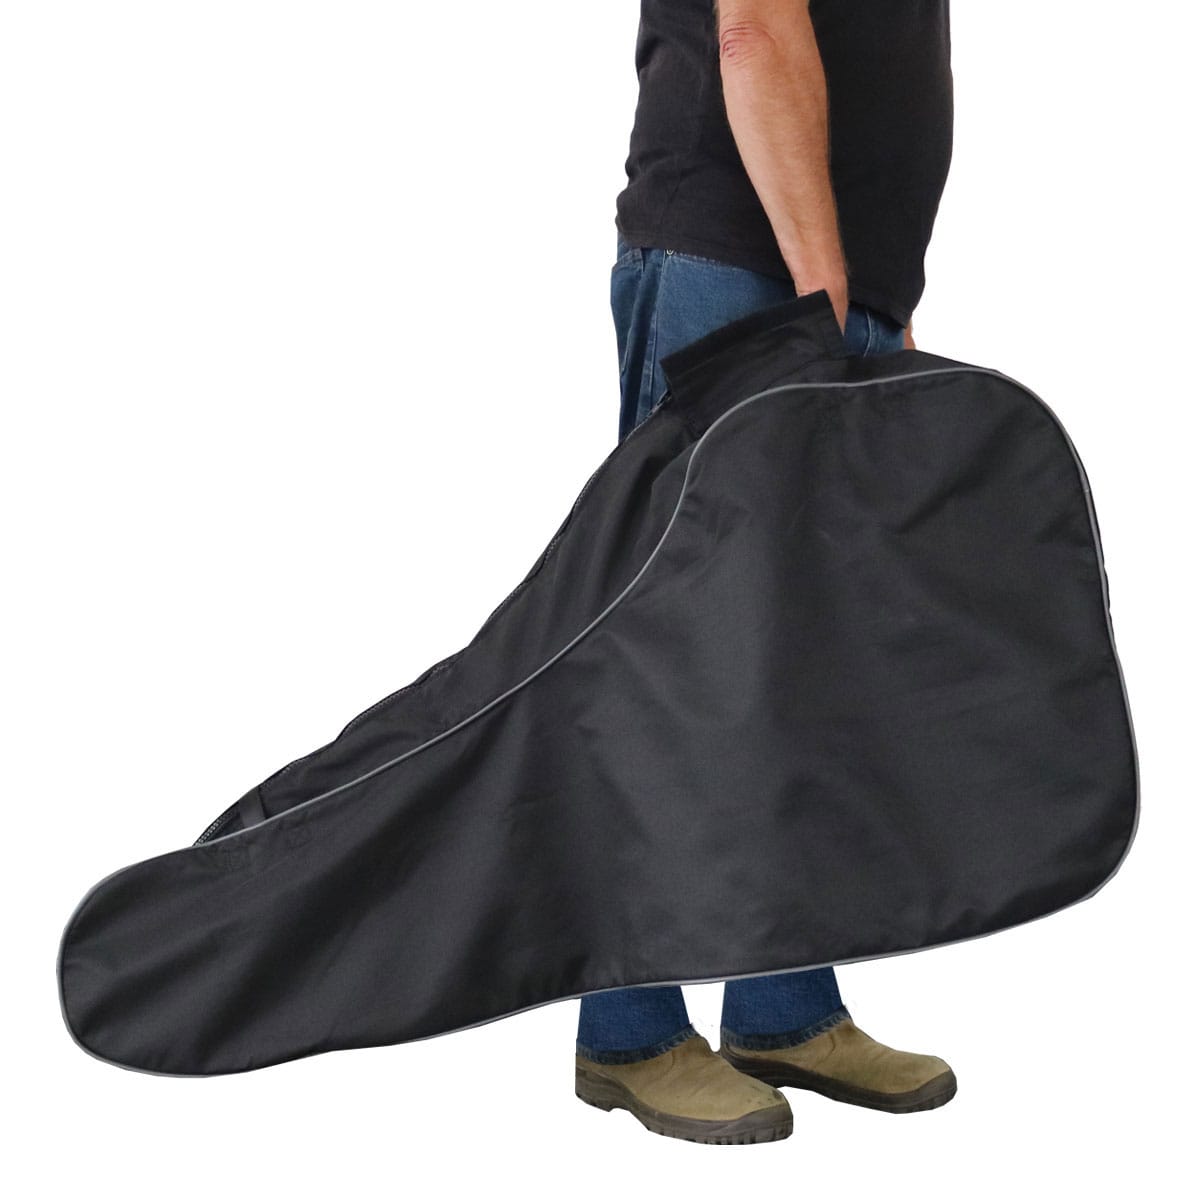 Outboard Motor Carry Bag